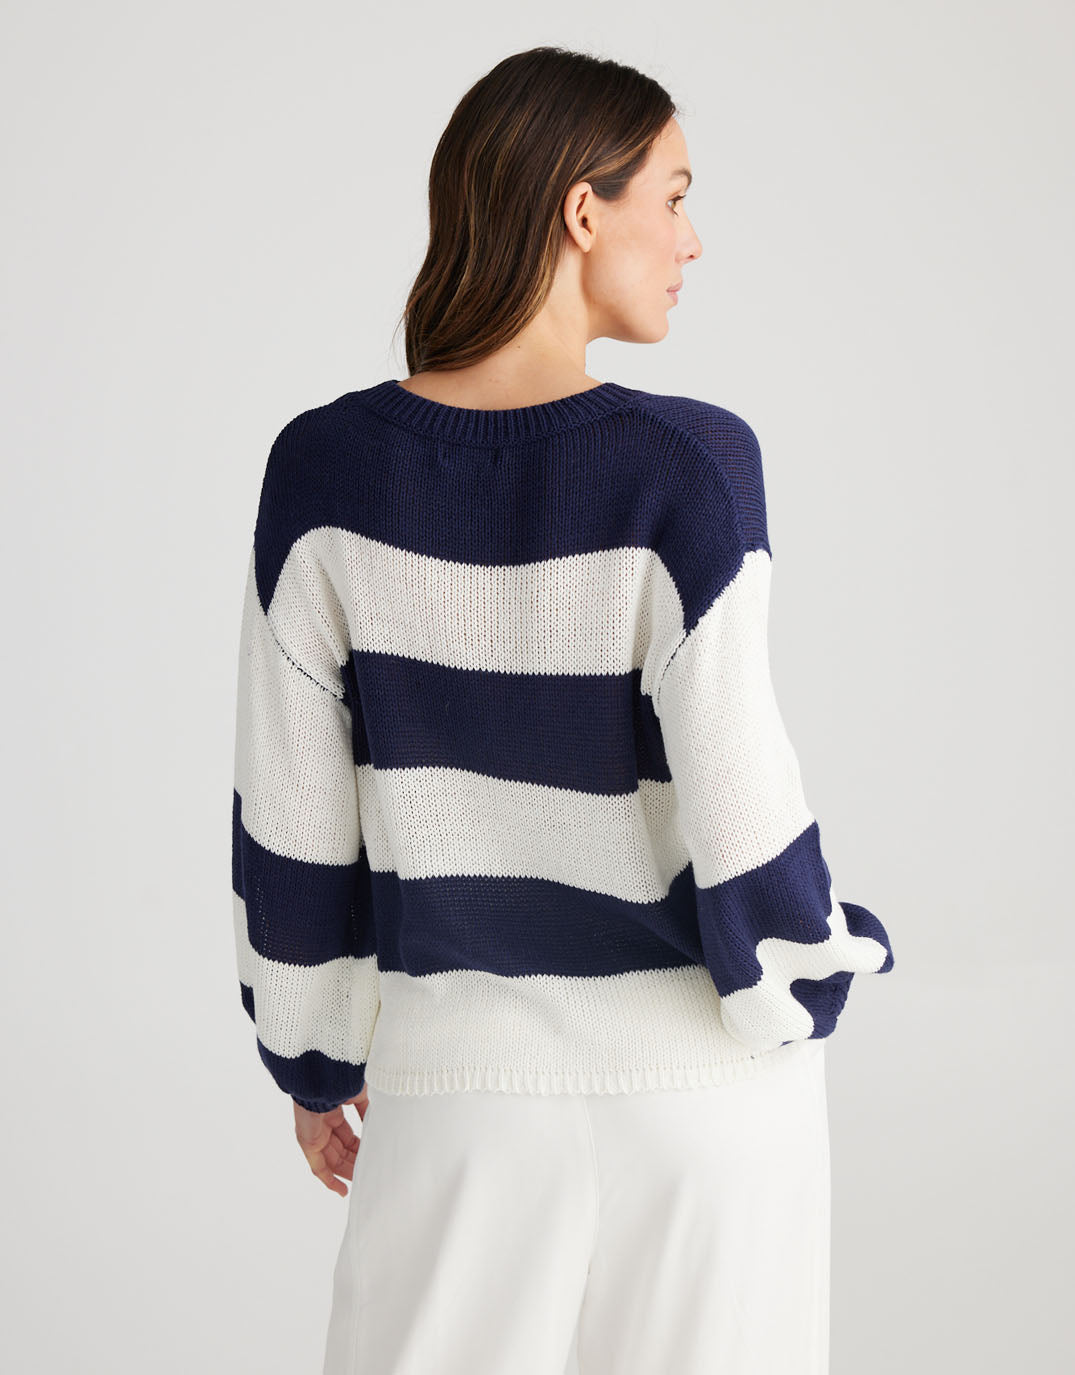 holiday-driftwood-knit-navy-white-womens-clothing